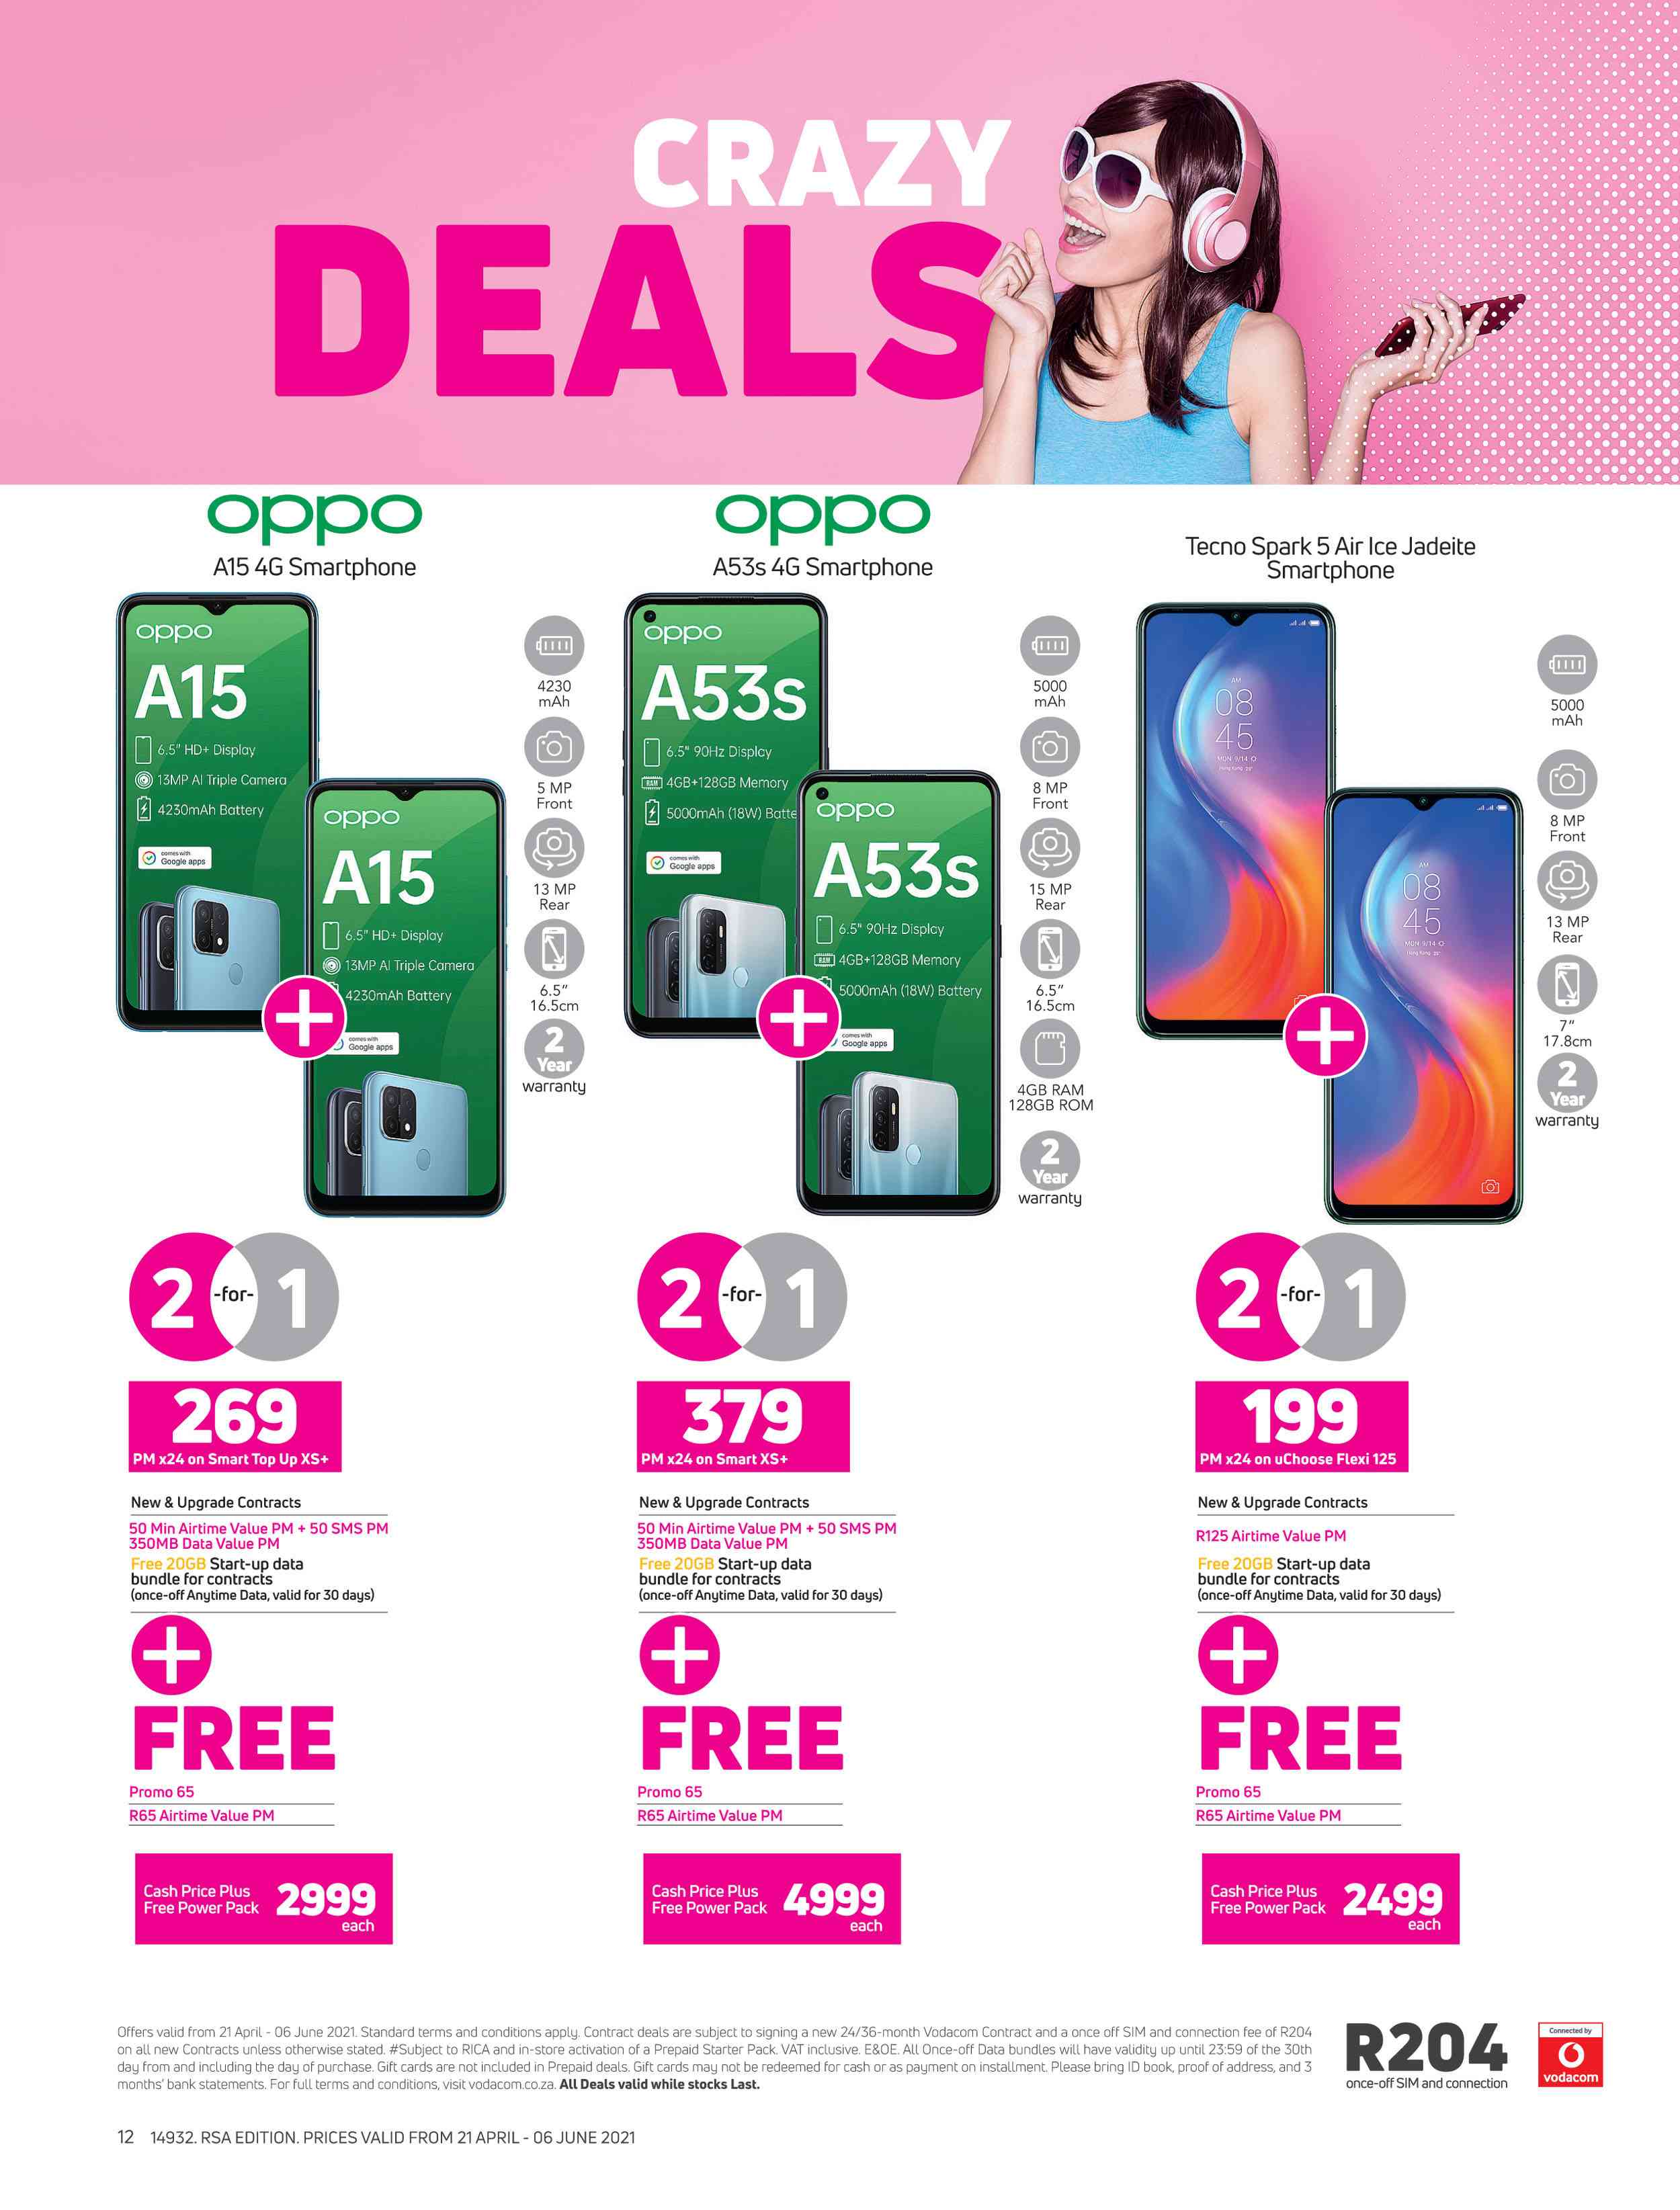 Special 2 x Oppo A53s 4G SmartphoneOn Smart XS+ Plus Free On Promo 65